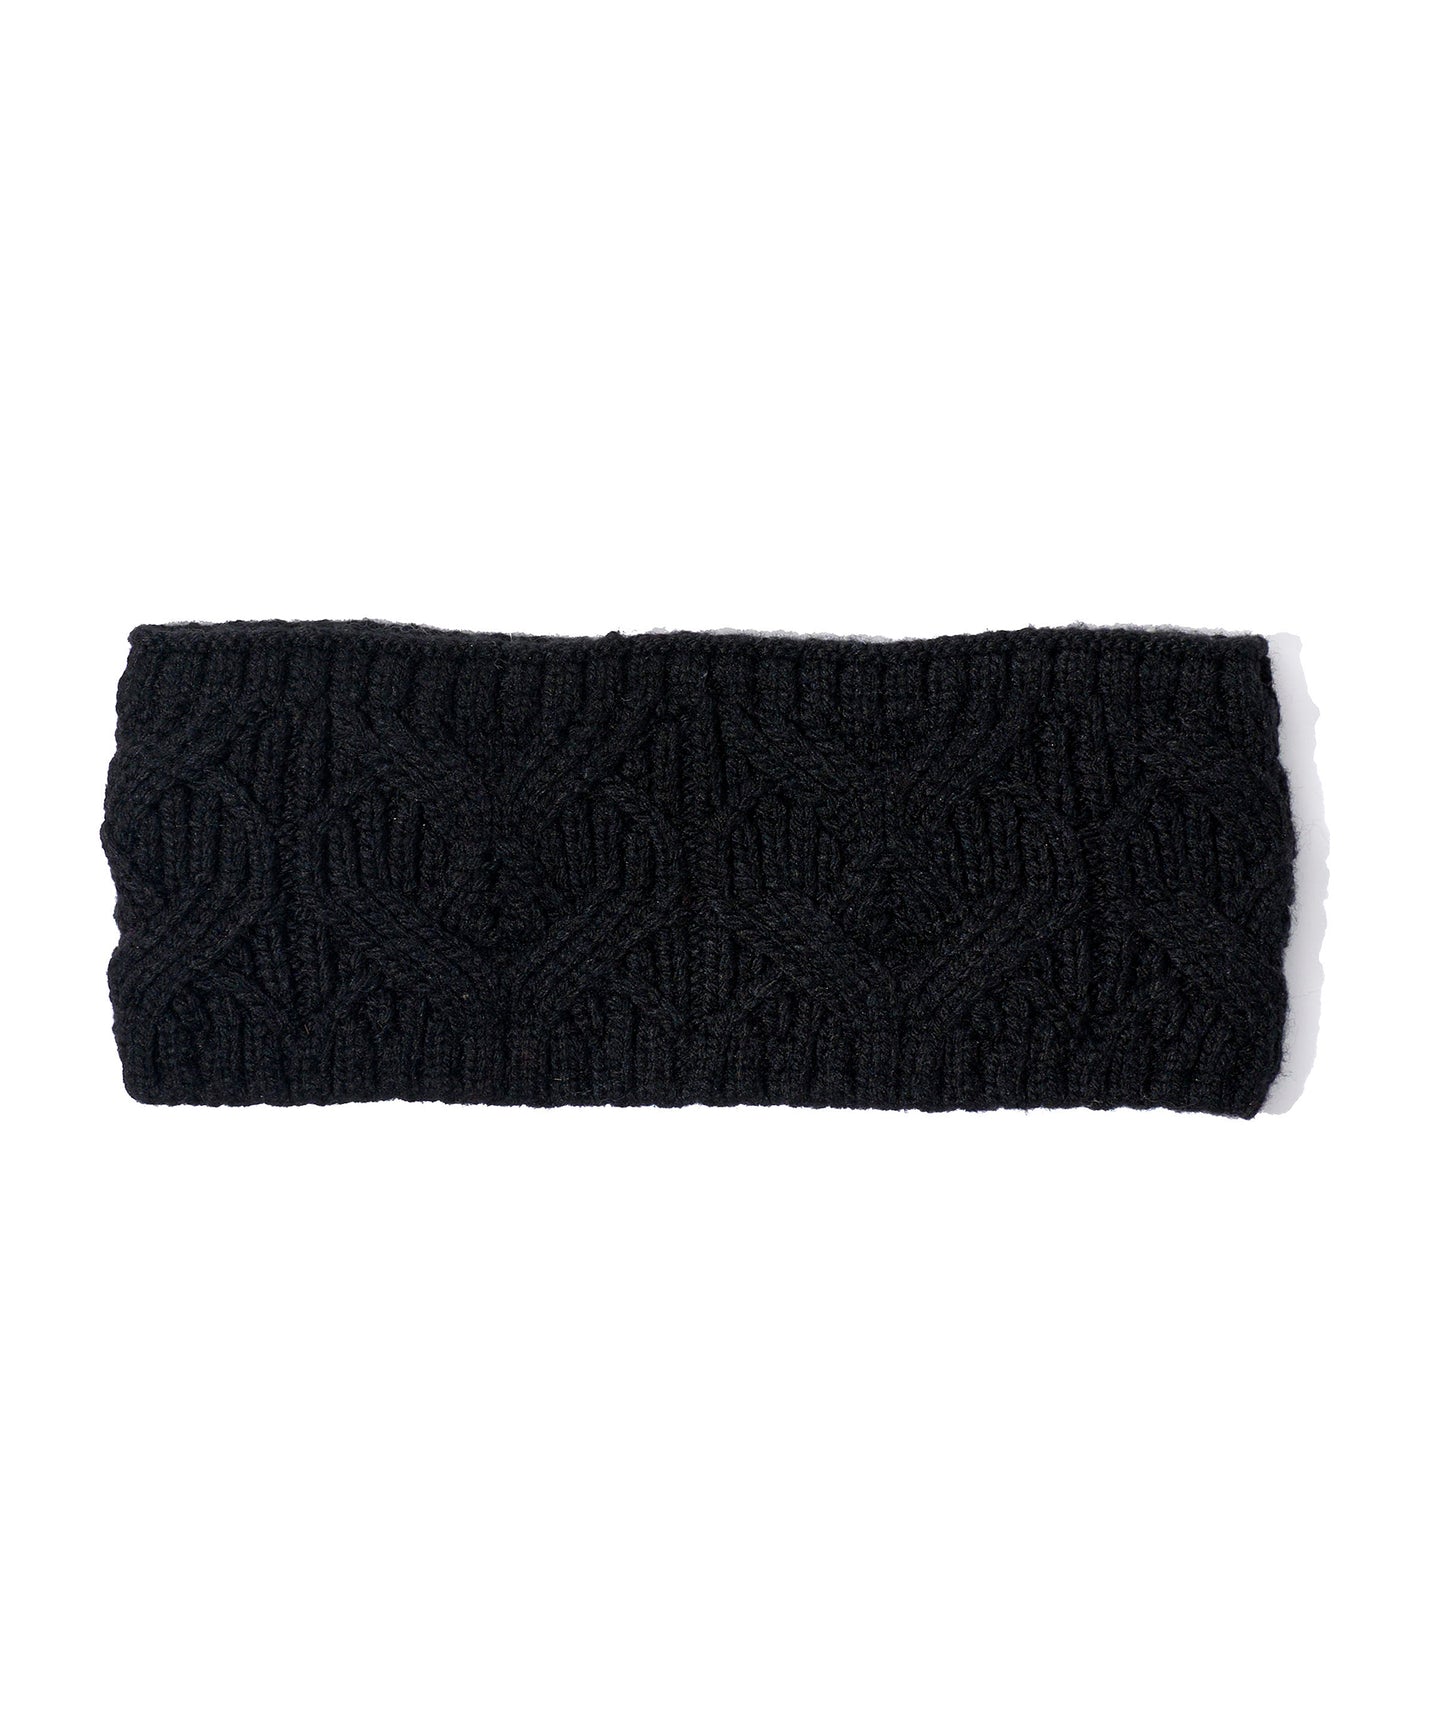 Loopy Cable Headband in color Black